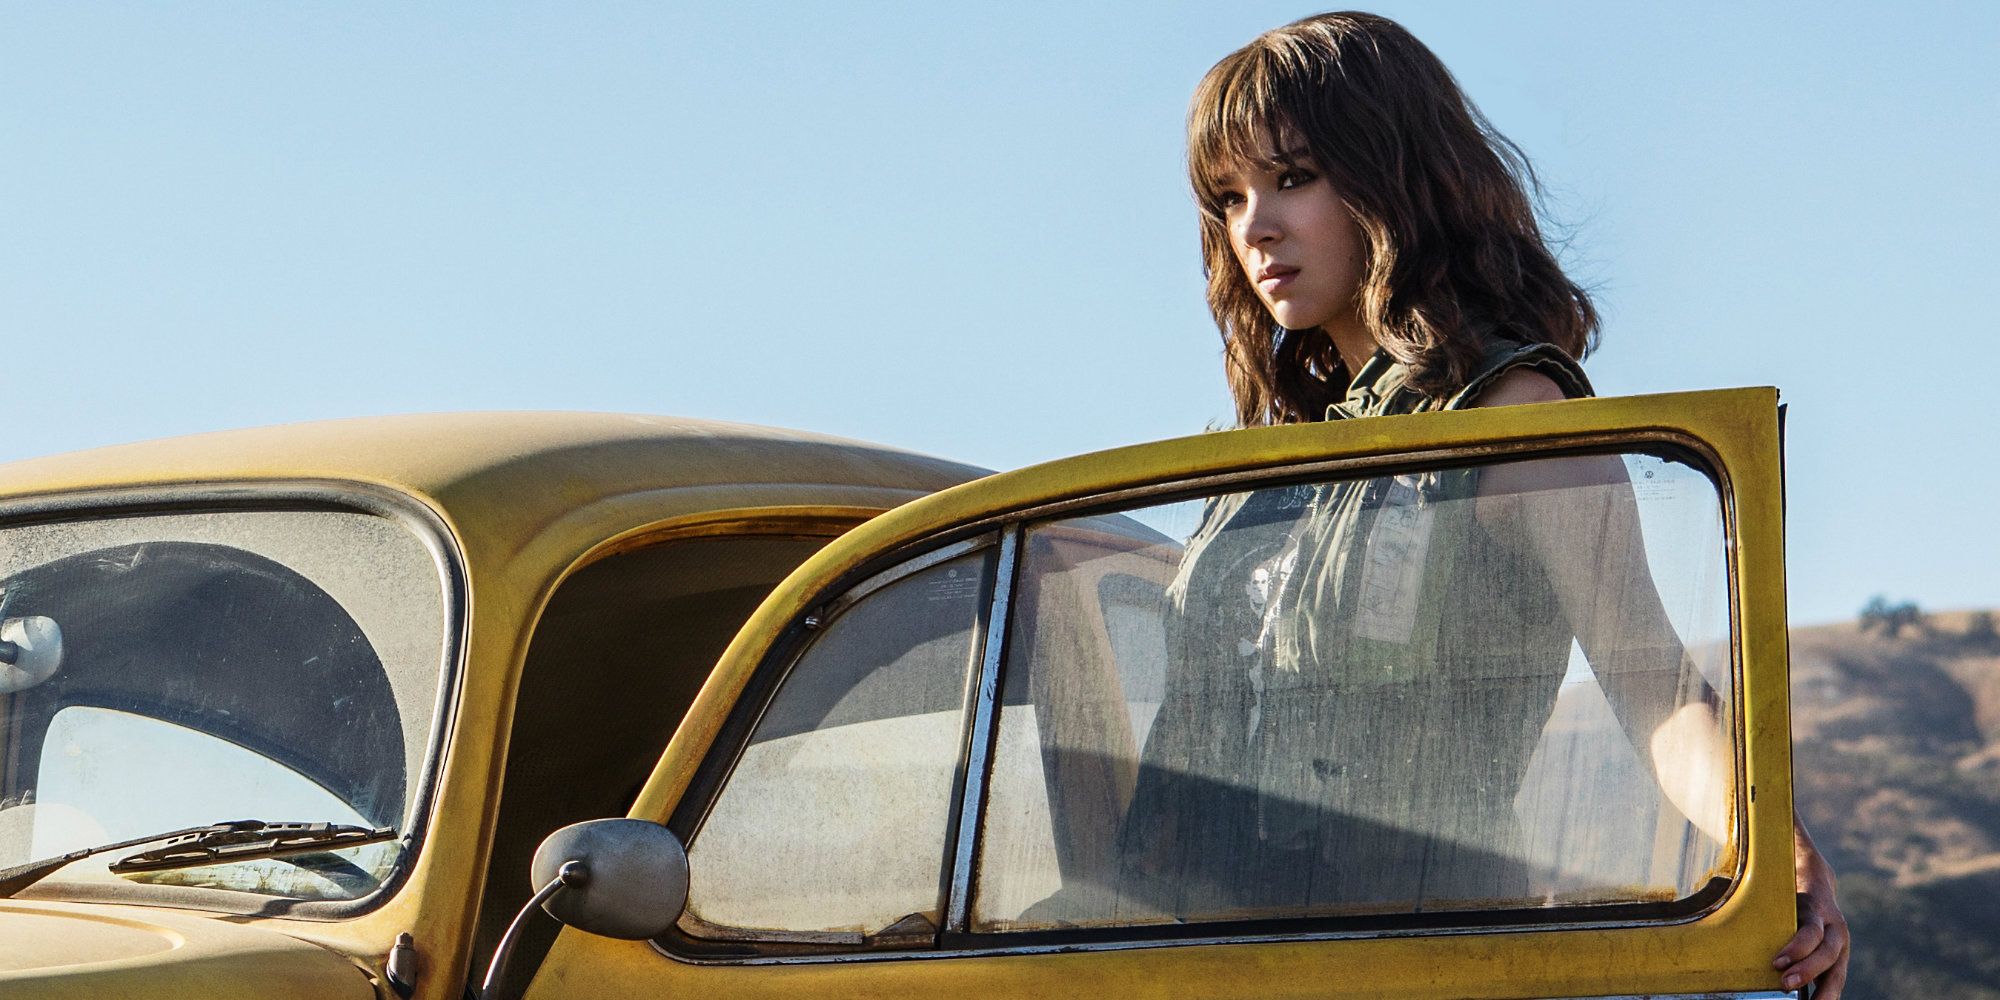 Charlie about to get into her car in the Bumblebee movie.